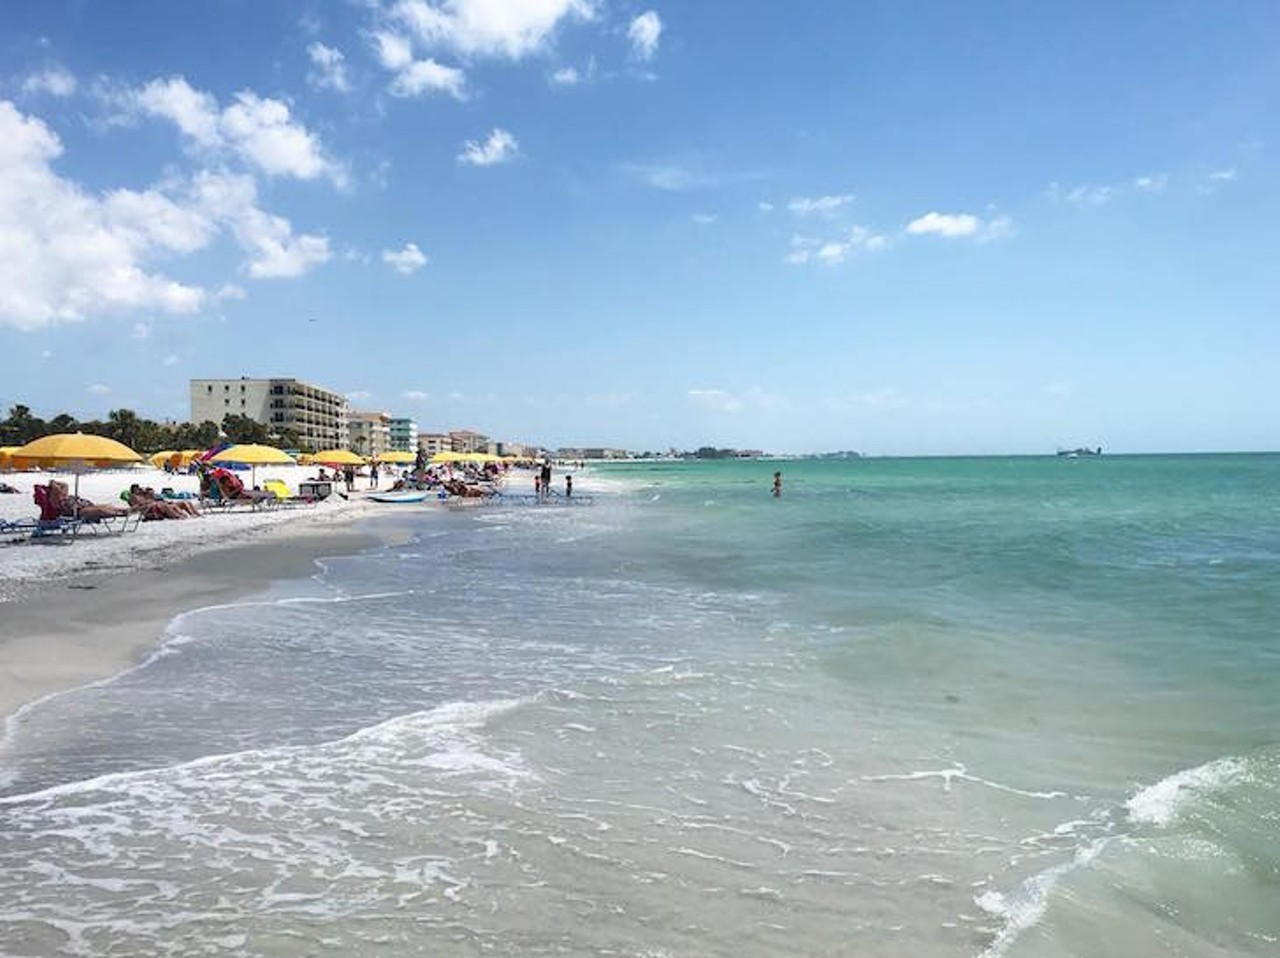 Madeira Beach
Estimated driving distance from Orlando: 2 hours and 36 minutes 
Madeira Beach, nestled between Treasure Island and Redington Shores, allows alcohol consumption from non-glass bottles. The three beaches are the only ones in Pinellas County that allow alcohol on their shores, which allows visitors to jump between beaches for different sights and activities, all while still being able to drink.
Photo via leahdemeyer/Instagram